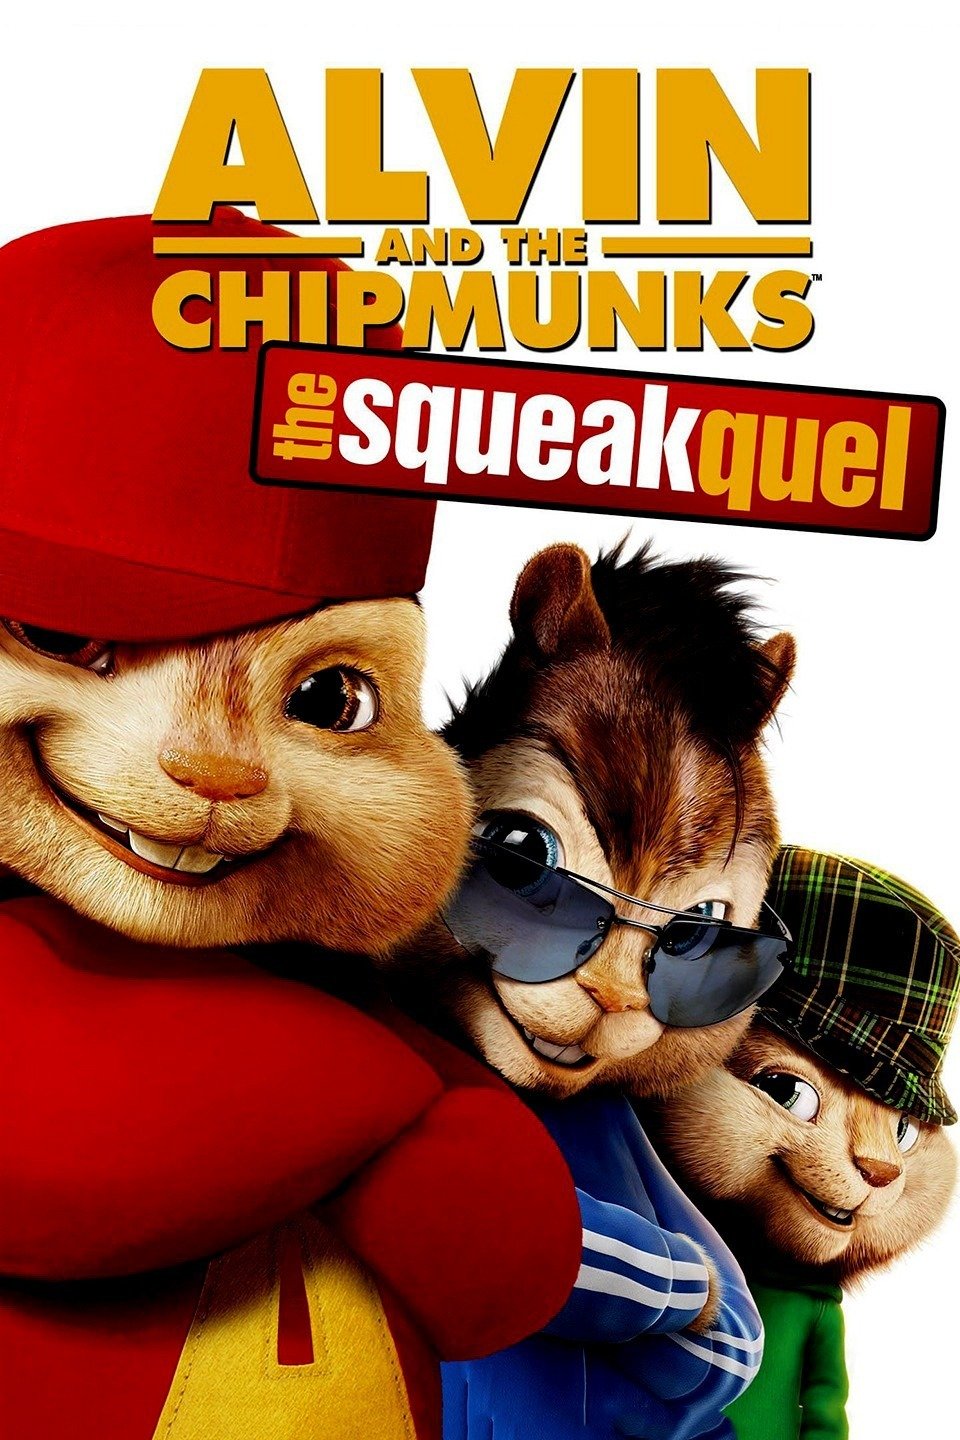 Alvin and the Chipmunks: The Squeakquel (2008) by Betty Thomas